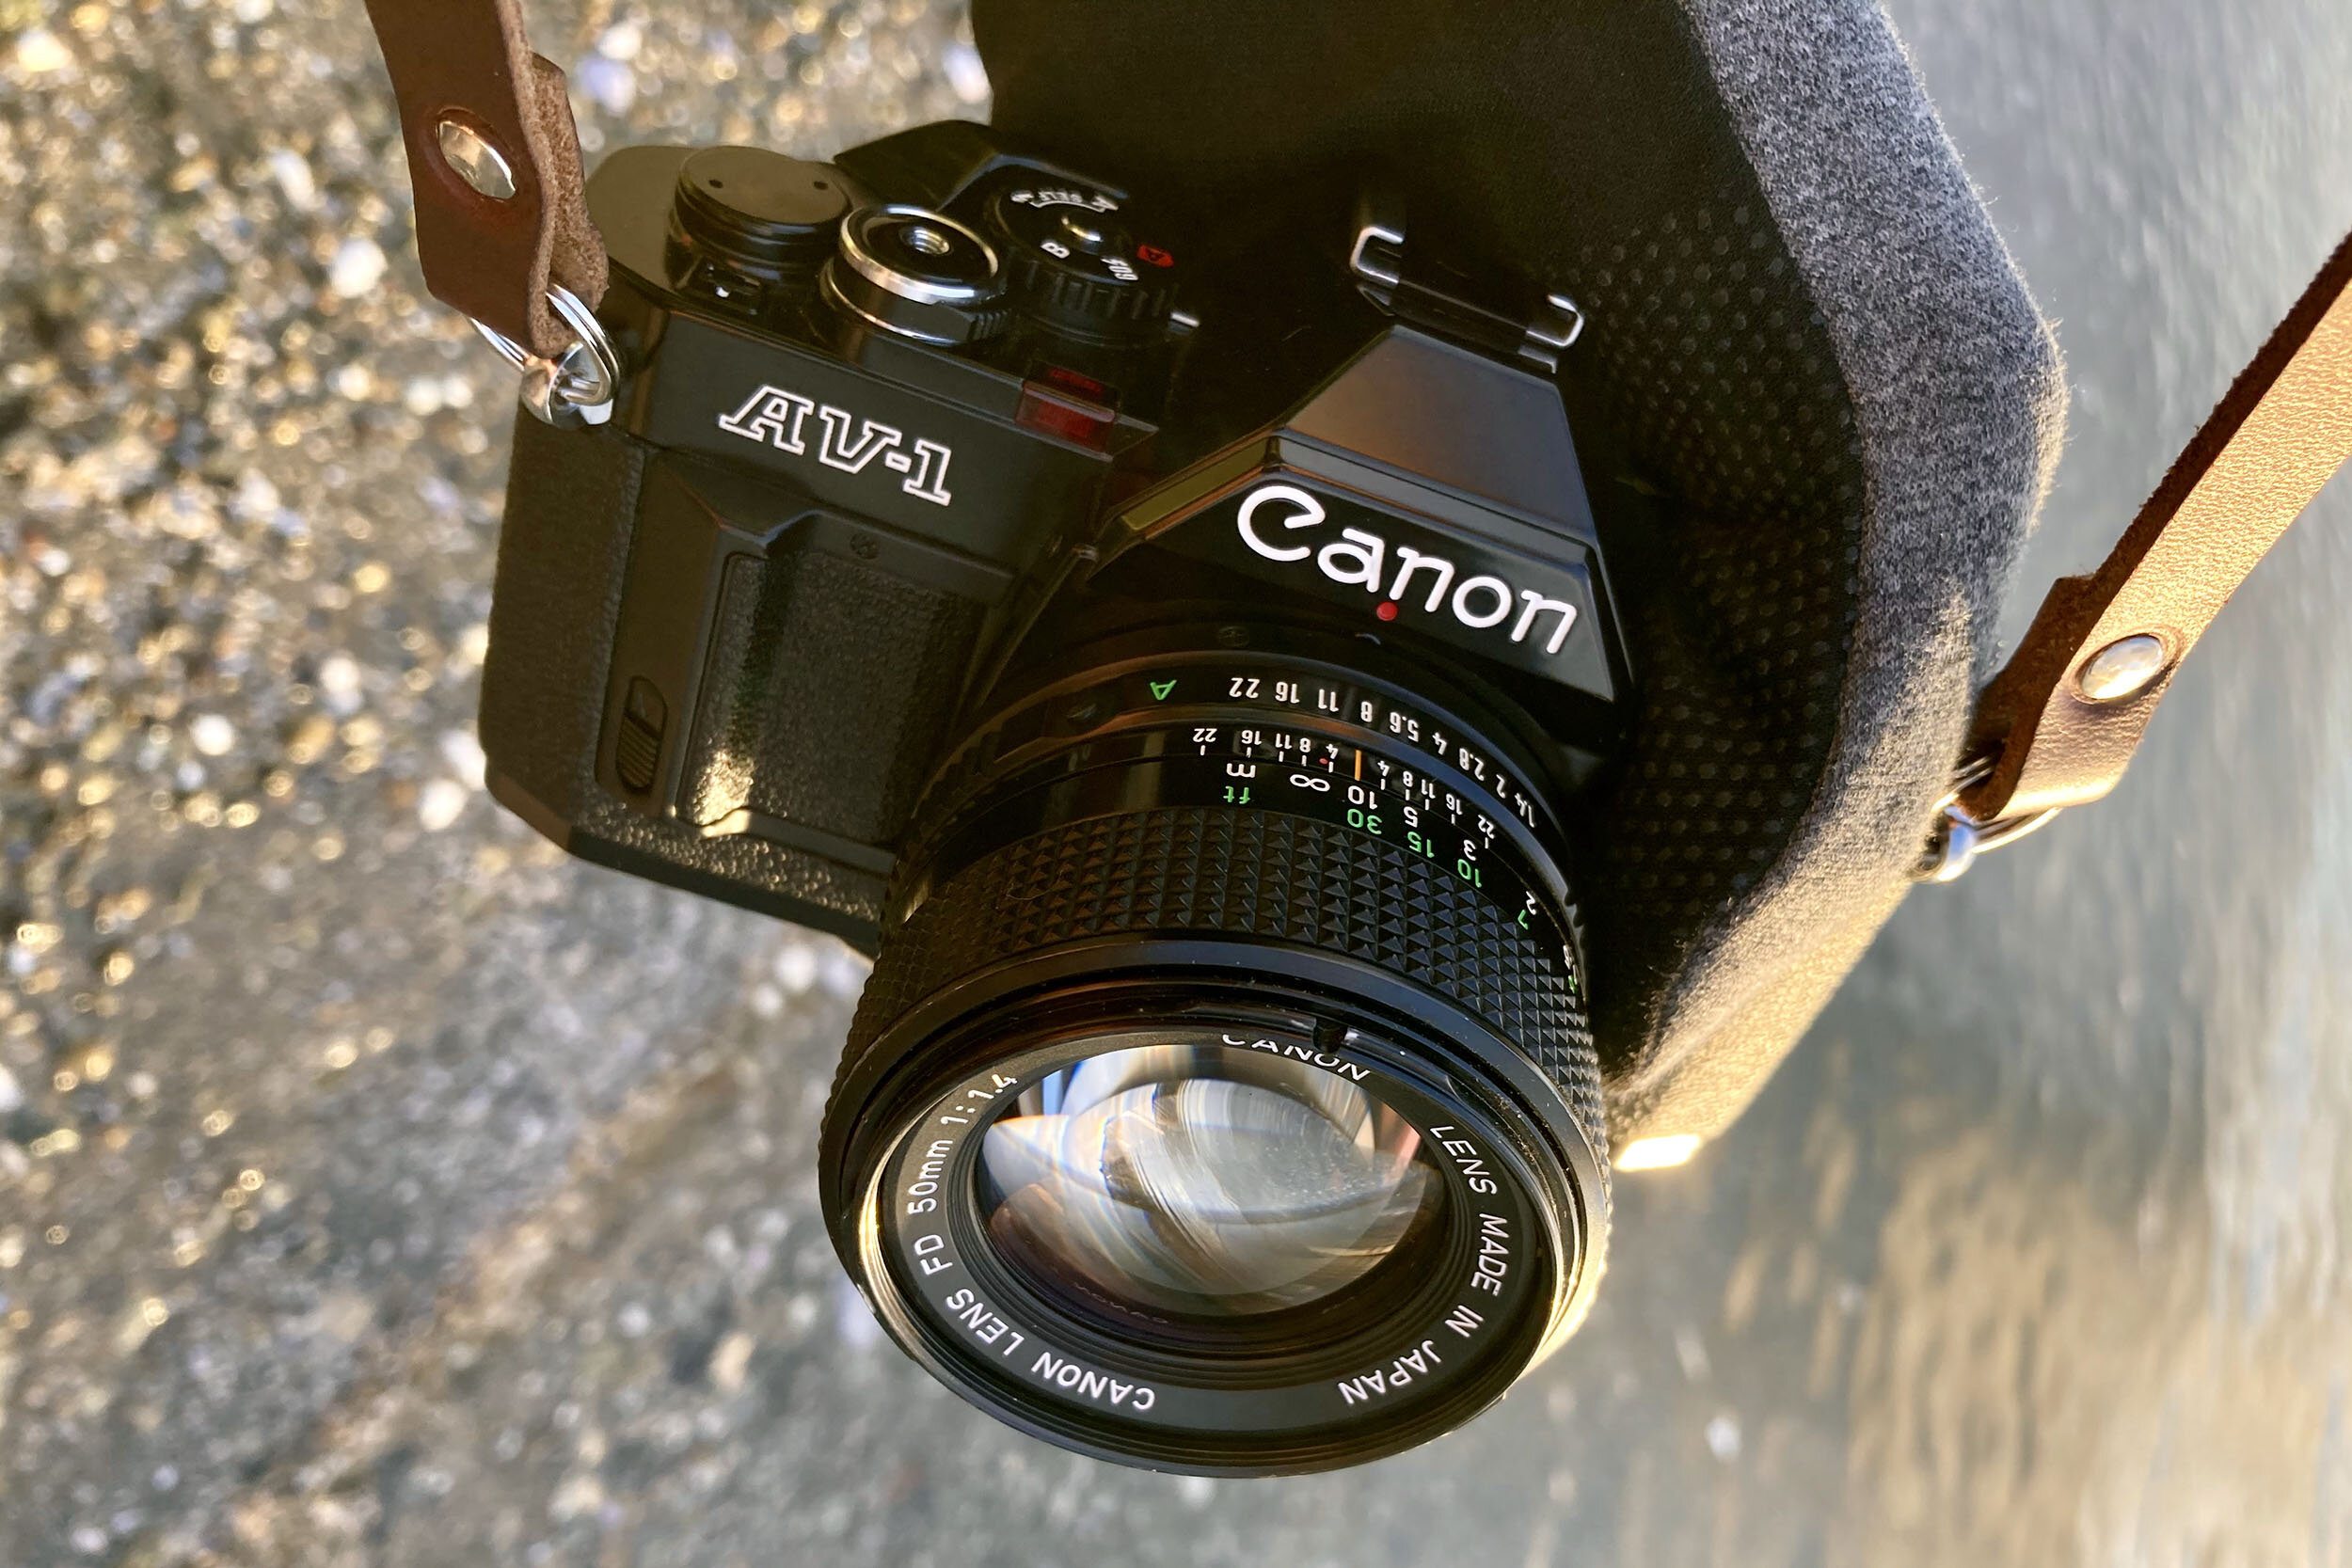 Canon FD 50mm f/1.4 Review | 5050 Travelog